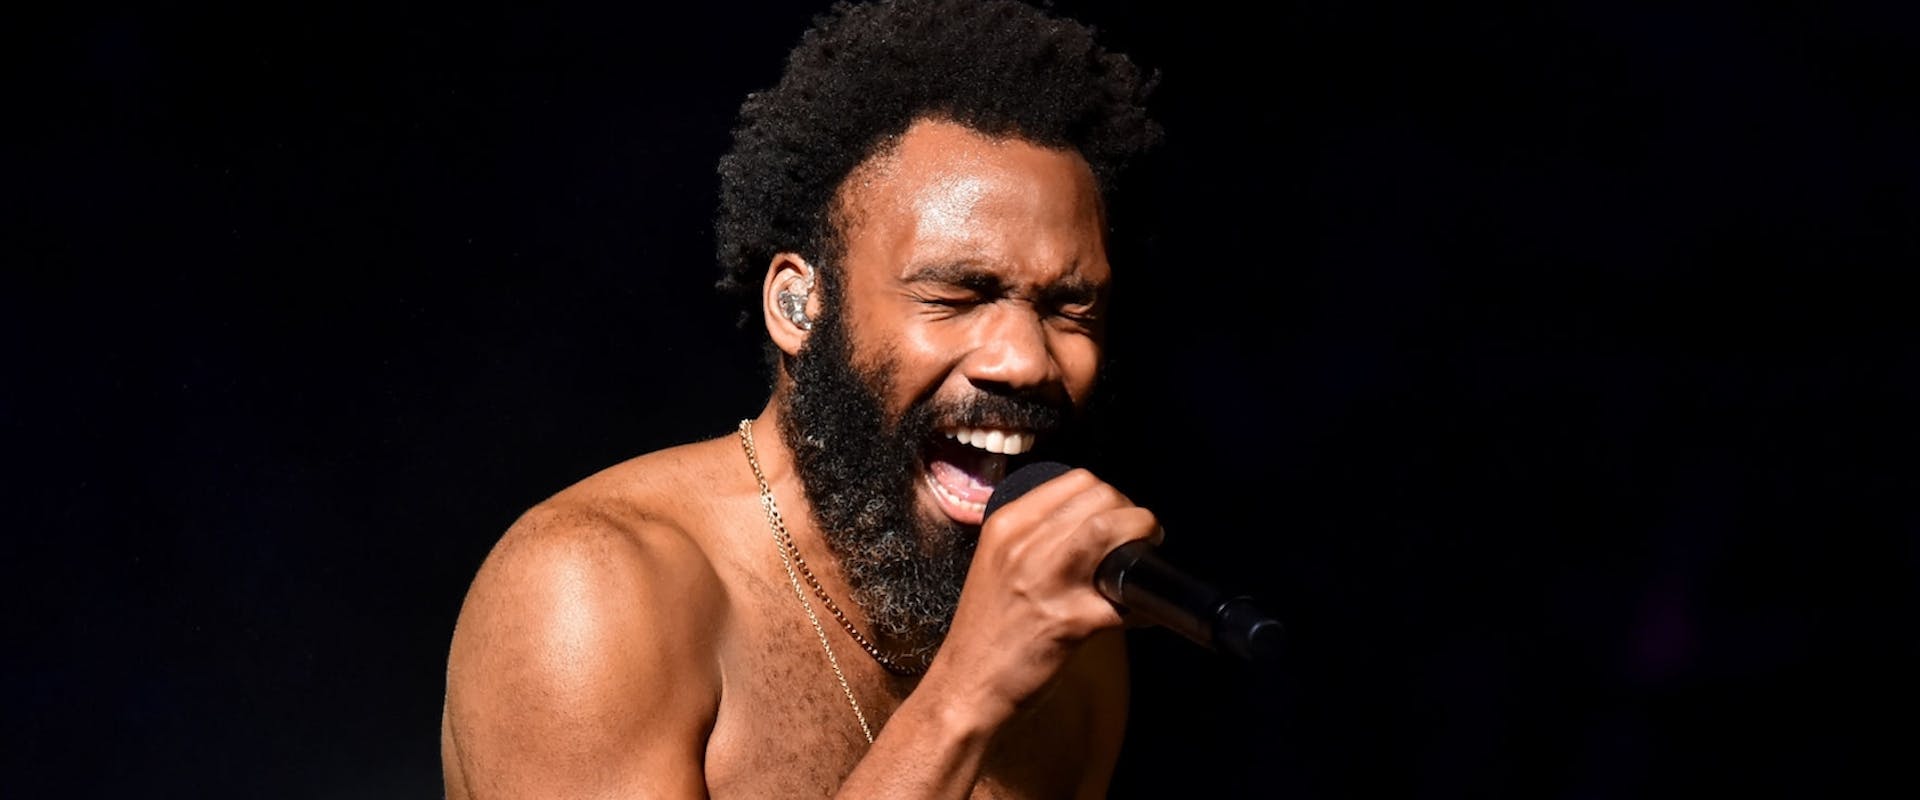 Childish Gambino performs onstage during the 2019 Outside Lands Music And Arts Festival at Golden Gate Park on August 10, 2019 in San Francisco, California.